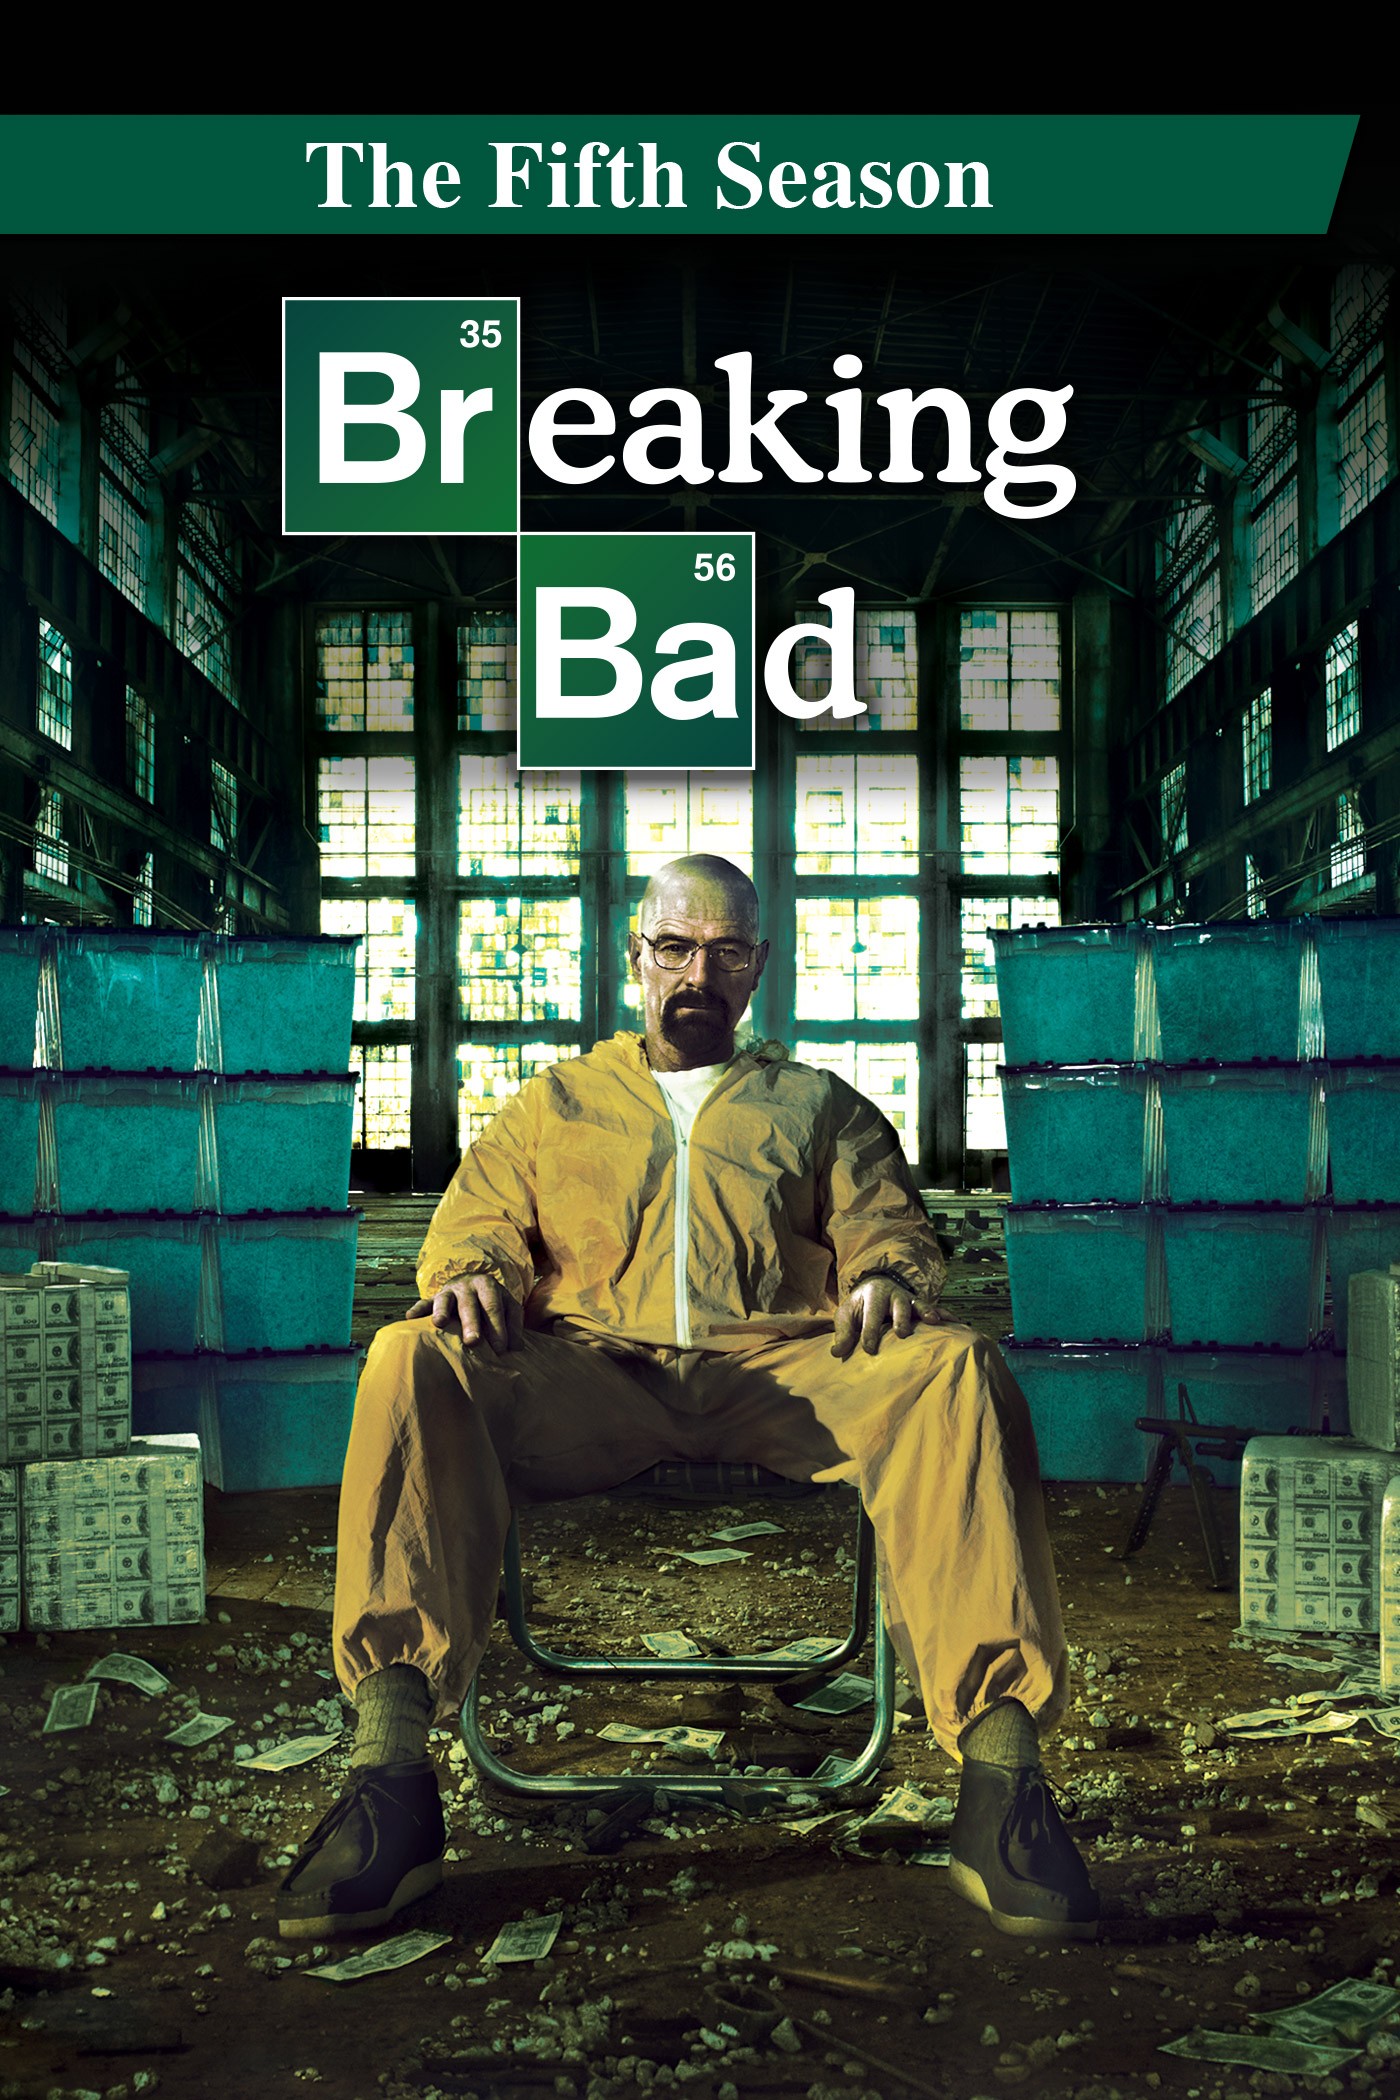 Breaking Bad - Where to Watch and Stream - TV Guide